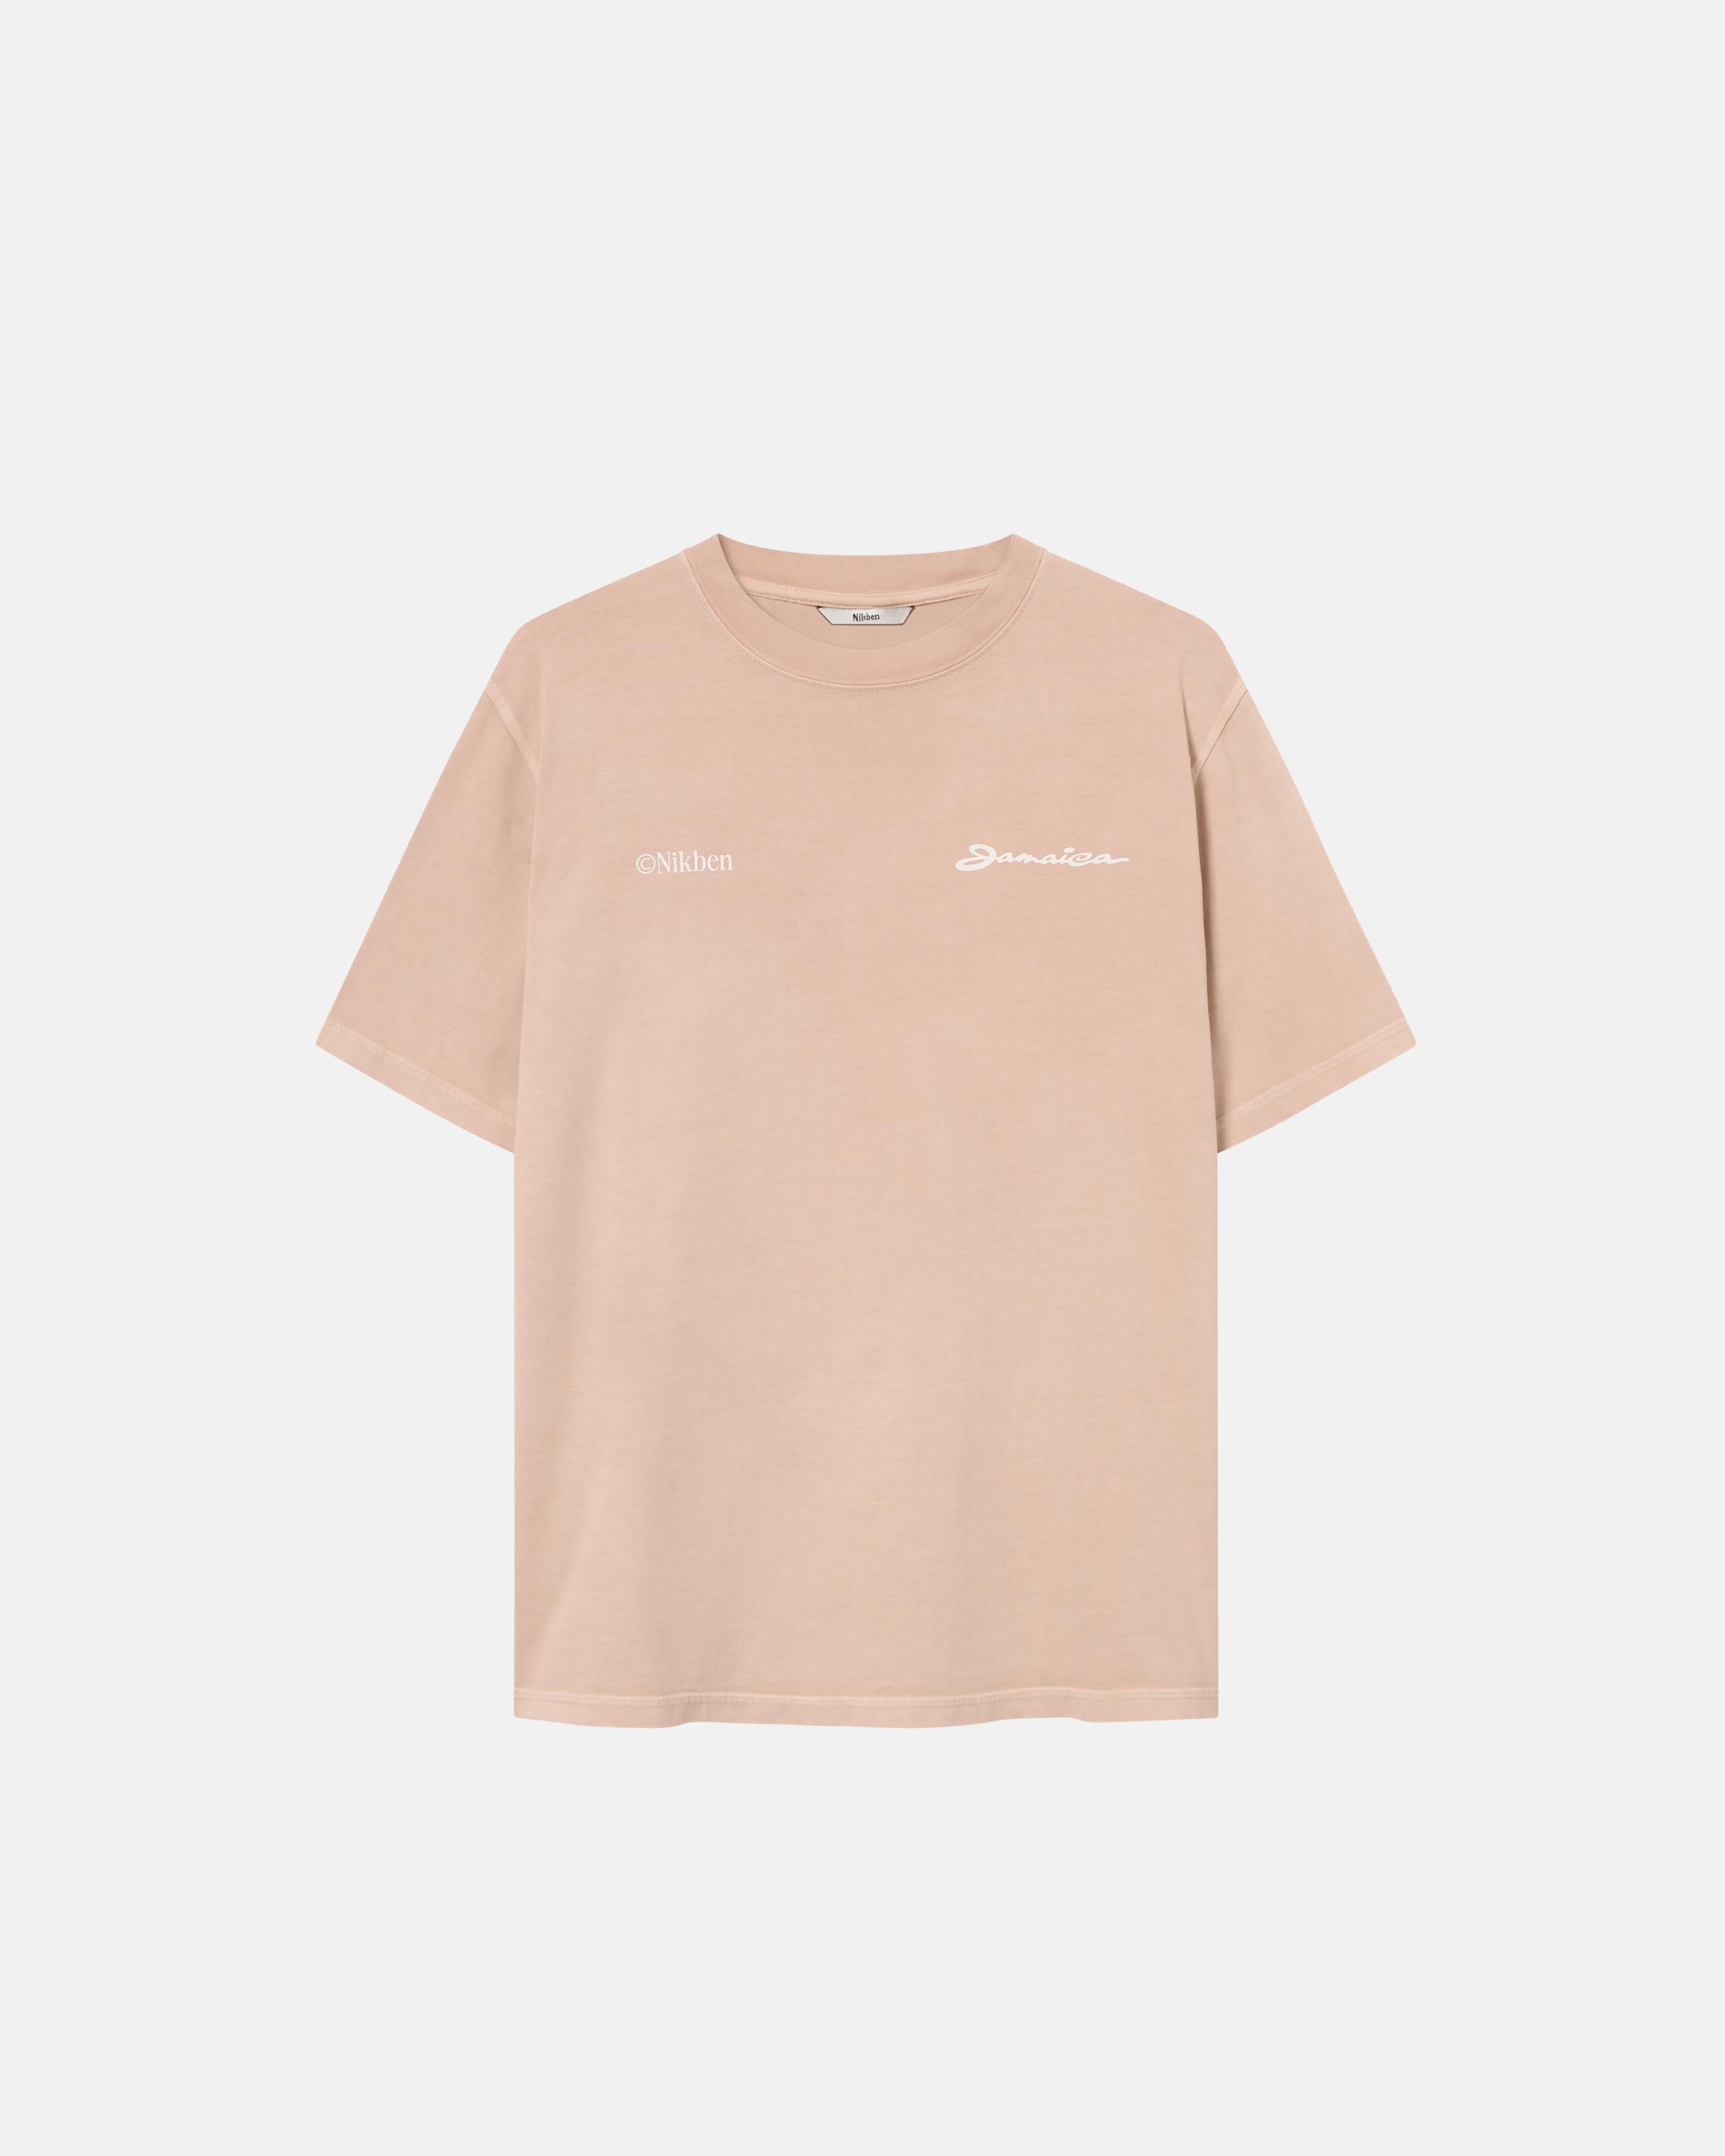 A sand colored t-shirt with 